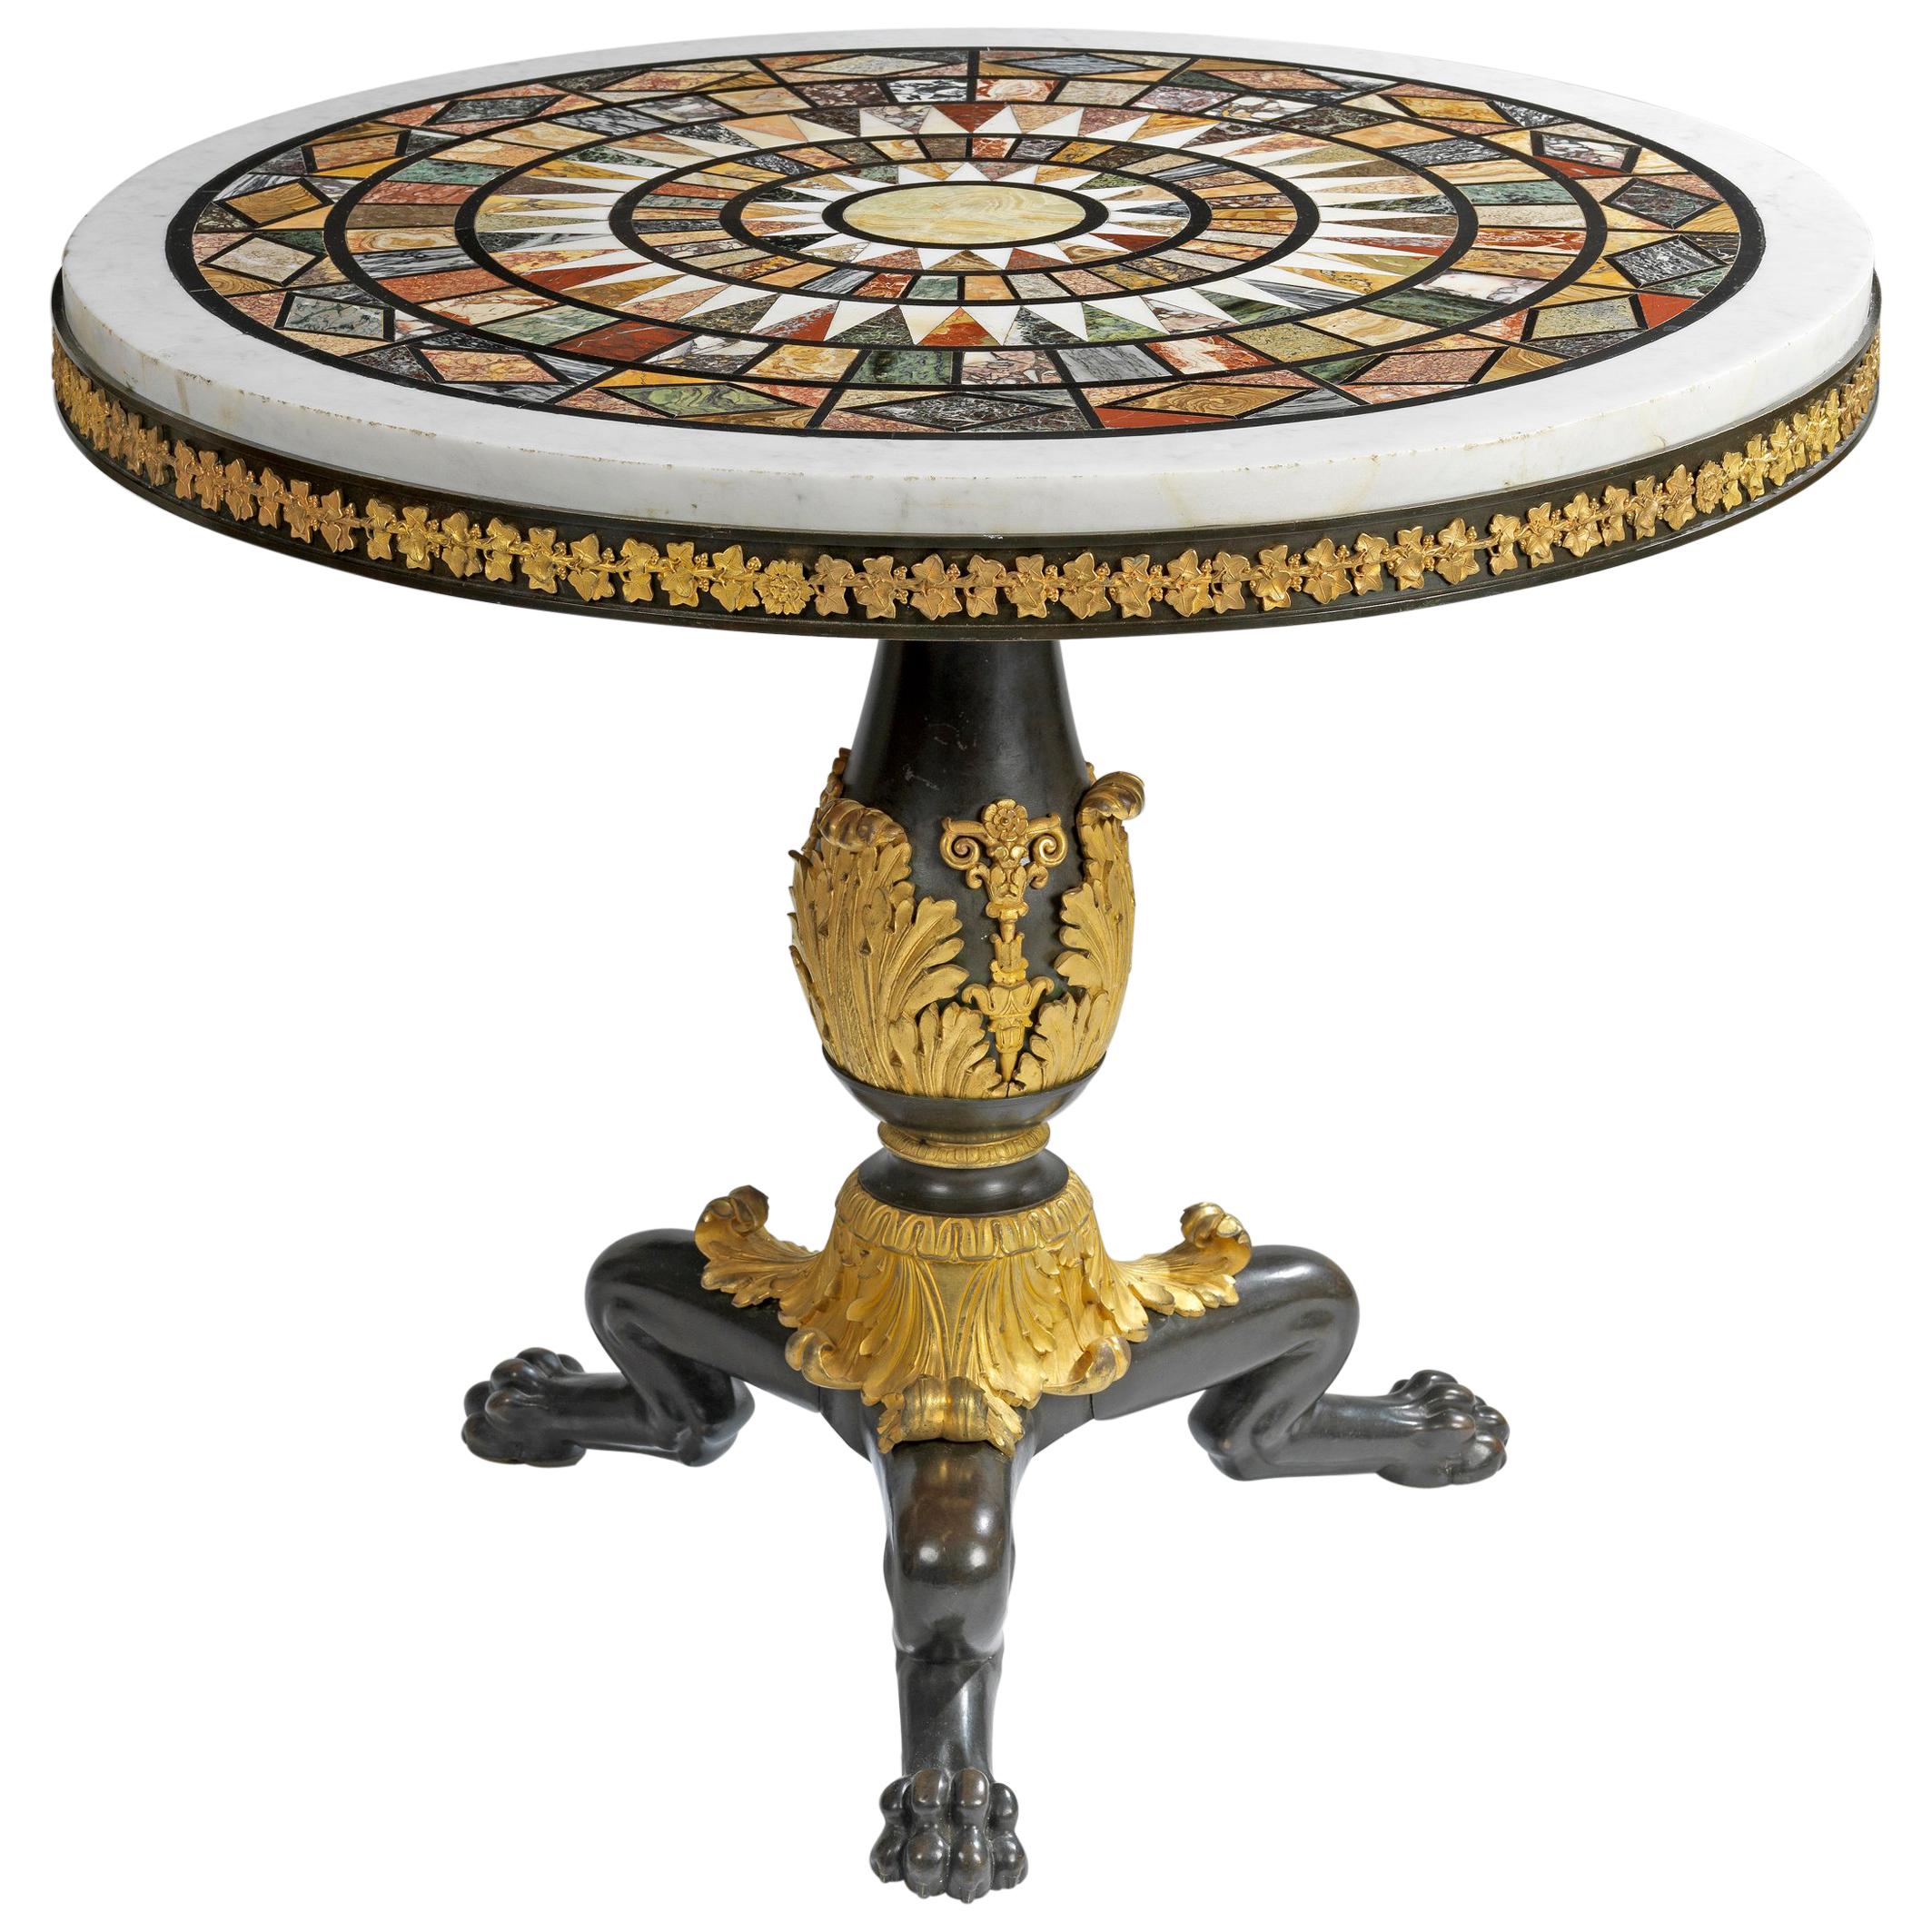 Fine Empire Gilt-Bronze Circular Centre Table with Inlaid Specimen Marble Top For Sale